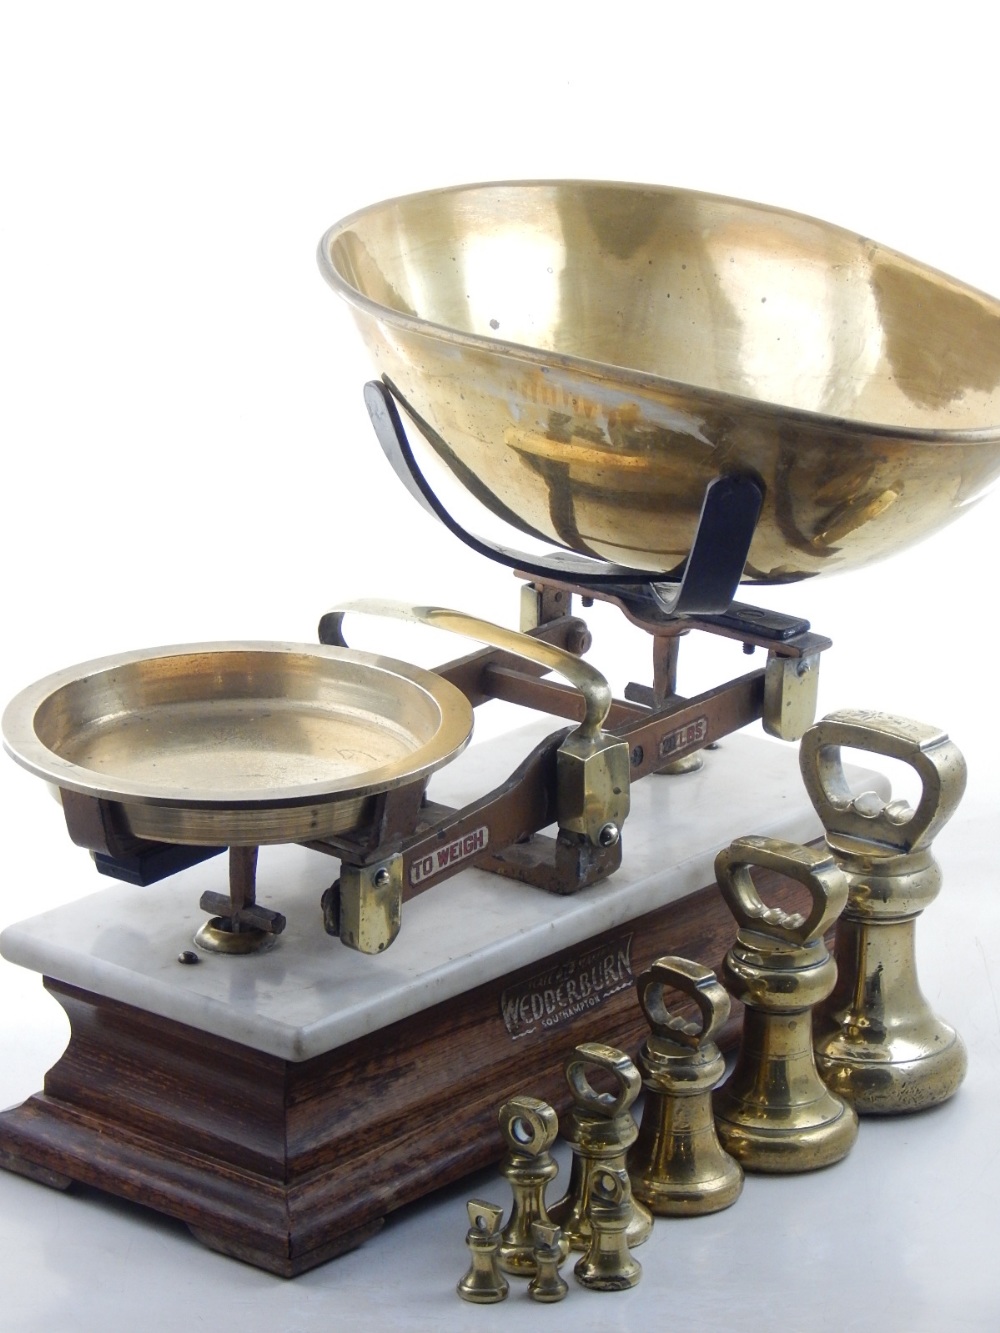 A pair of early 20th century scales, by Wedderburn of Southampton, with brass pans, - Image 3 of 3